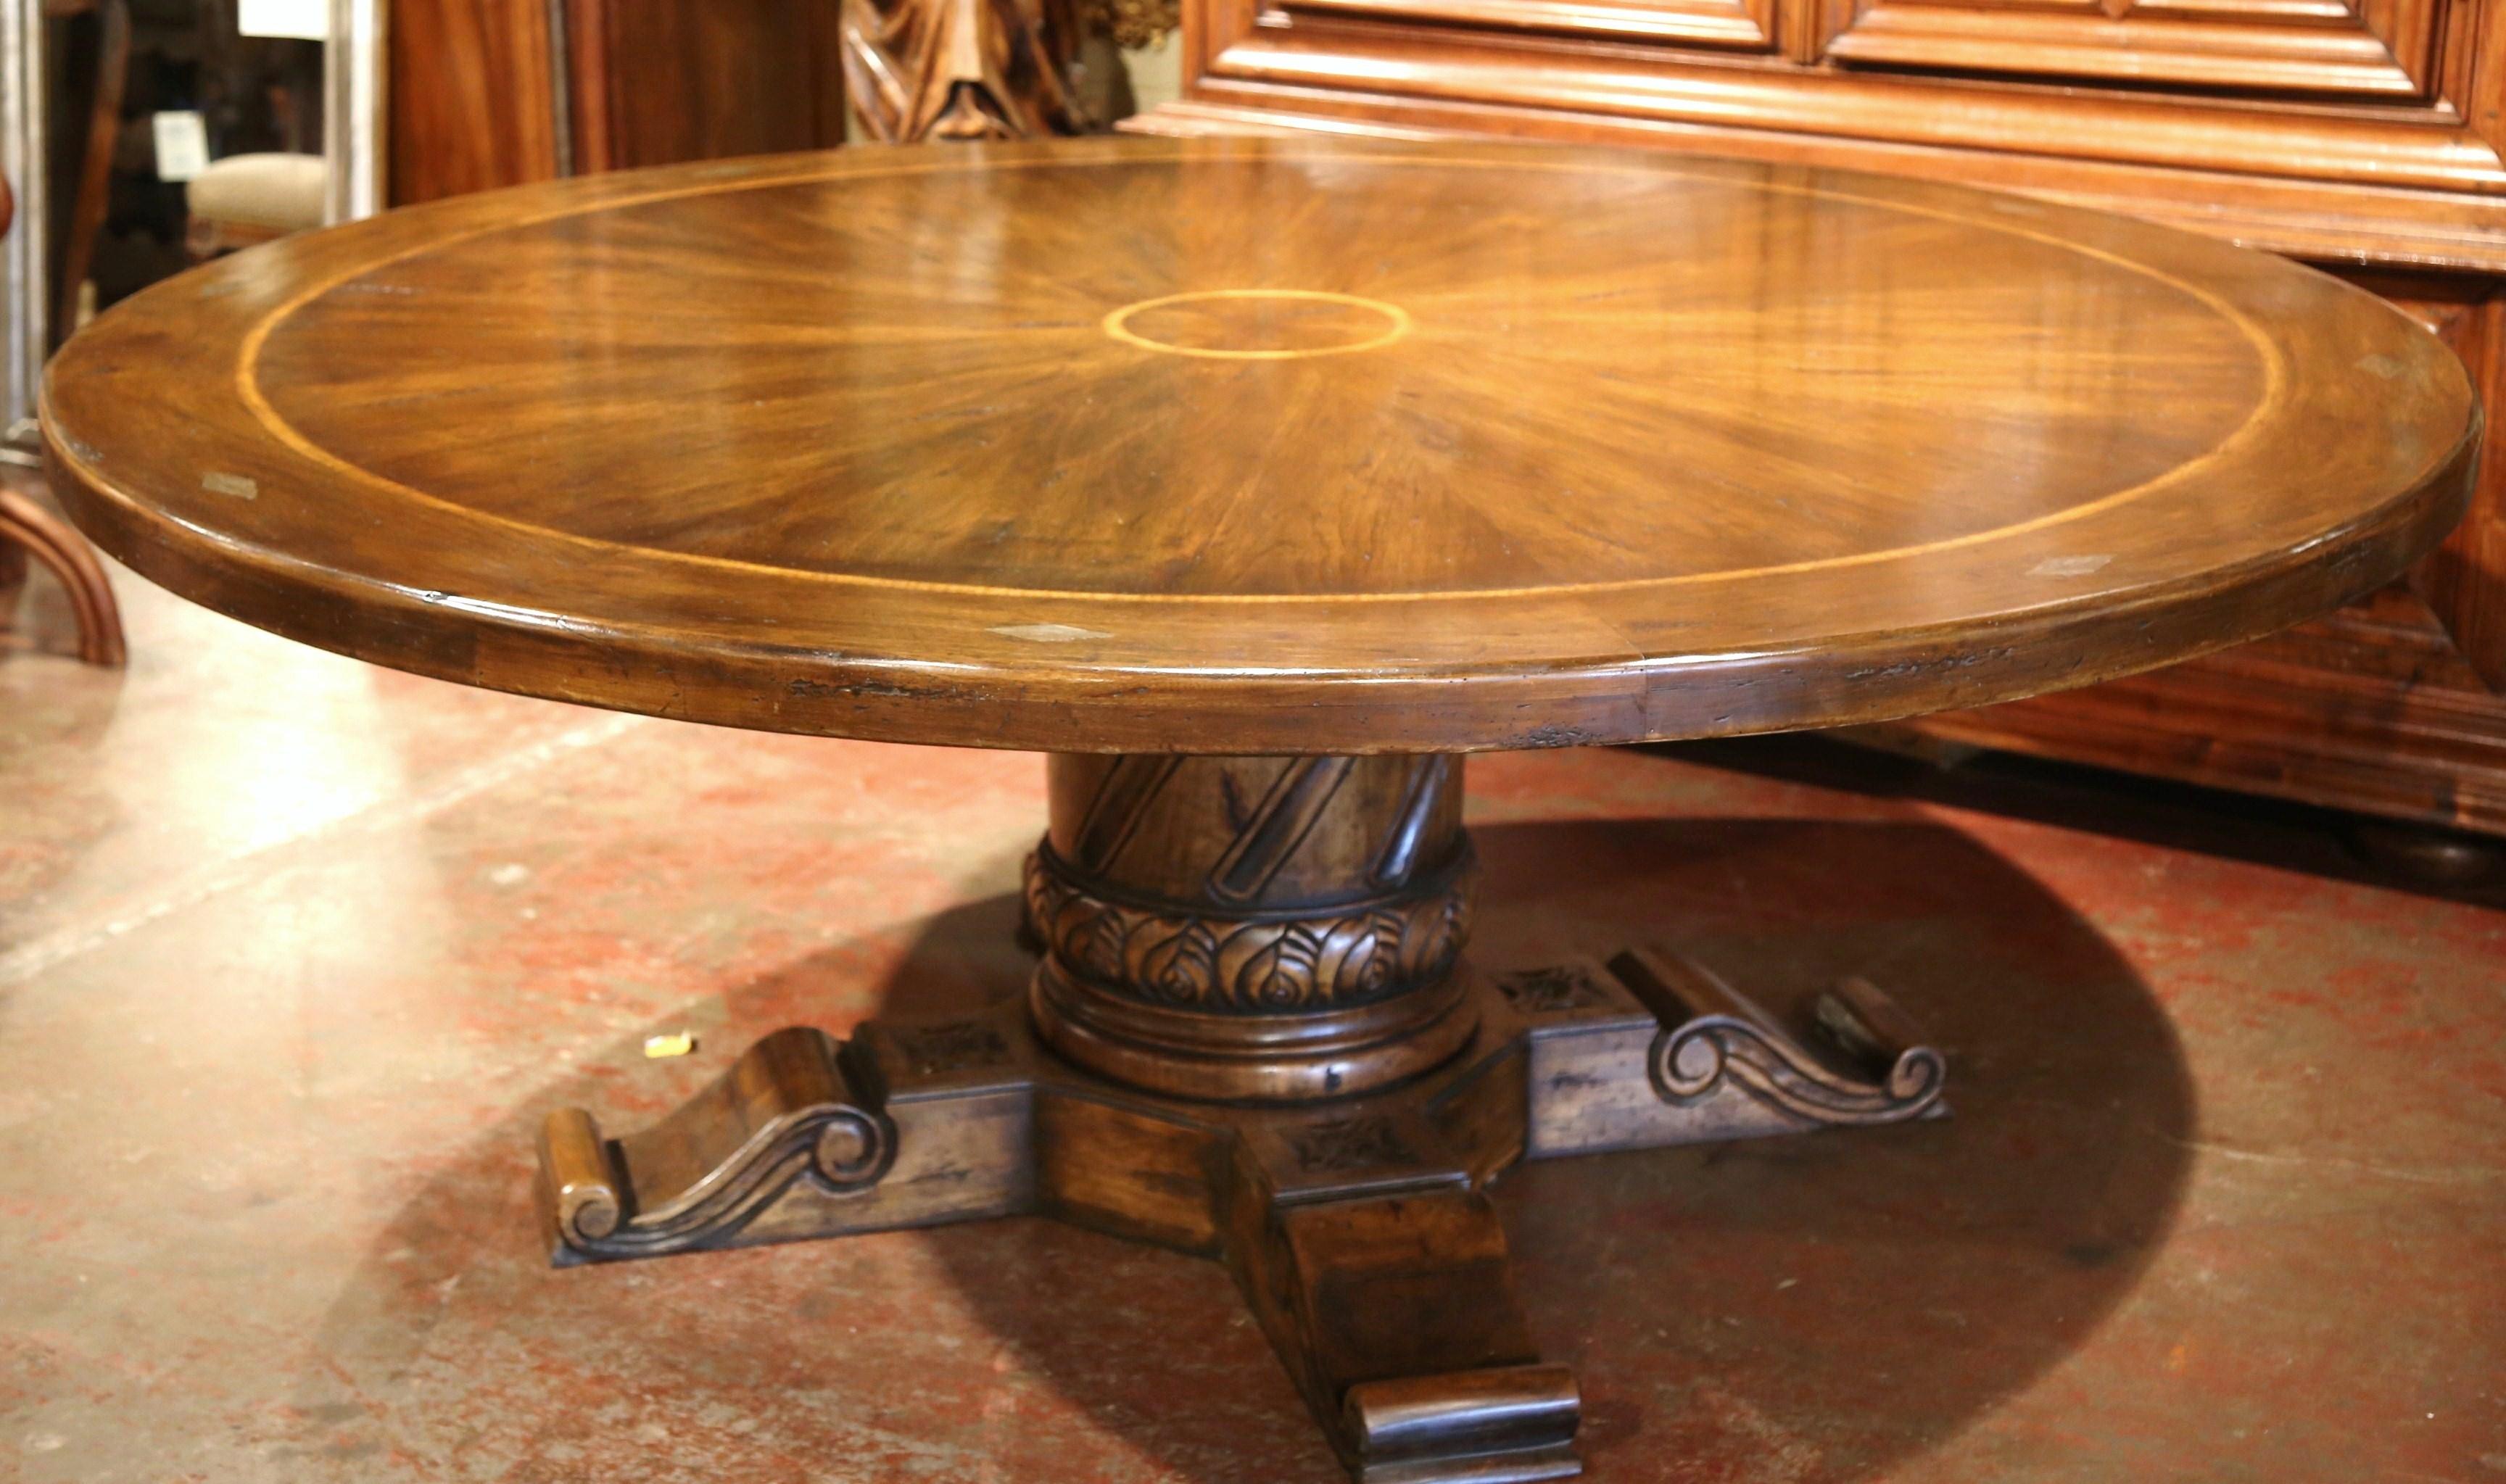 Louis XIII Large Round Walnut Table with Carved Center Pedestal and Geometric Design